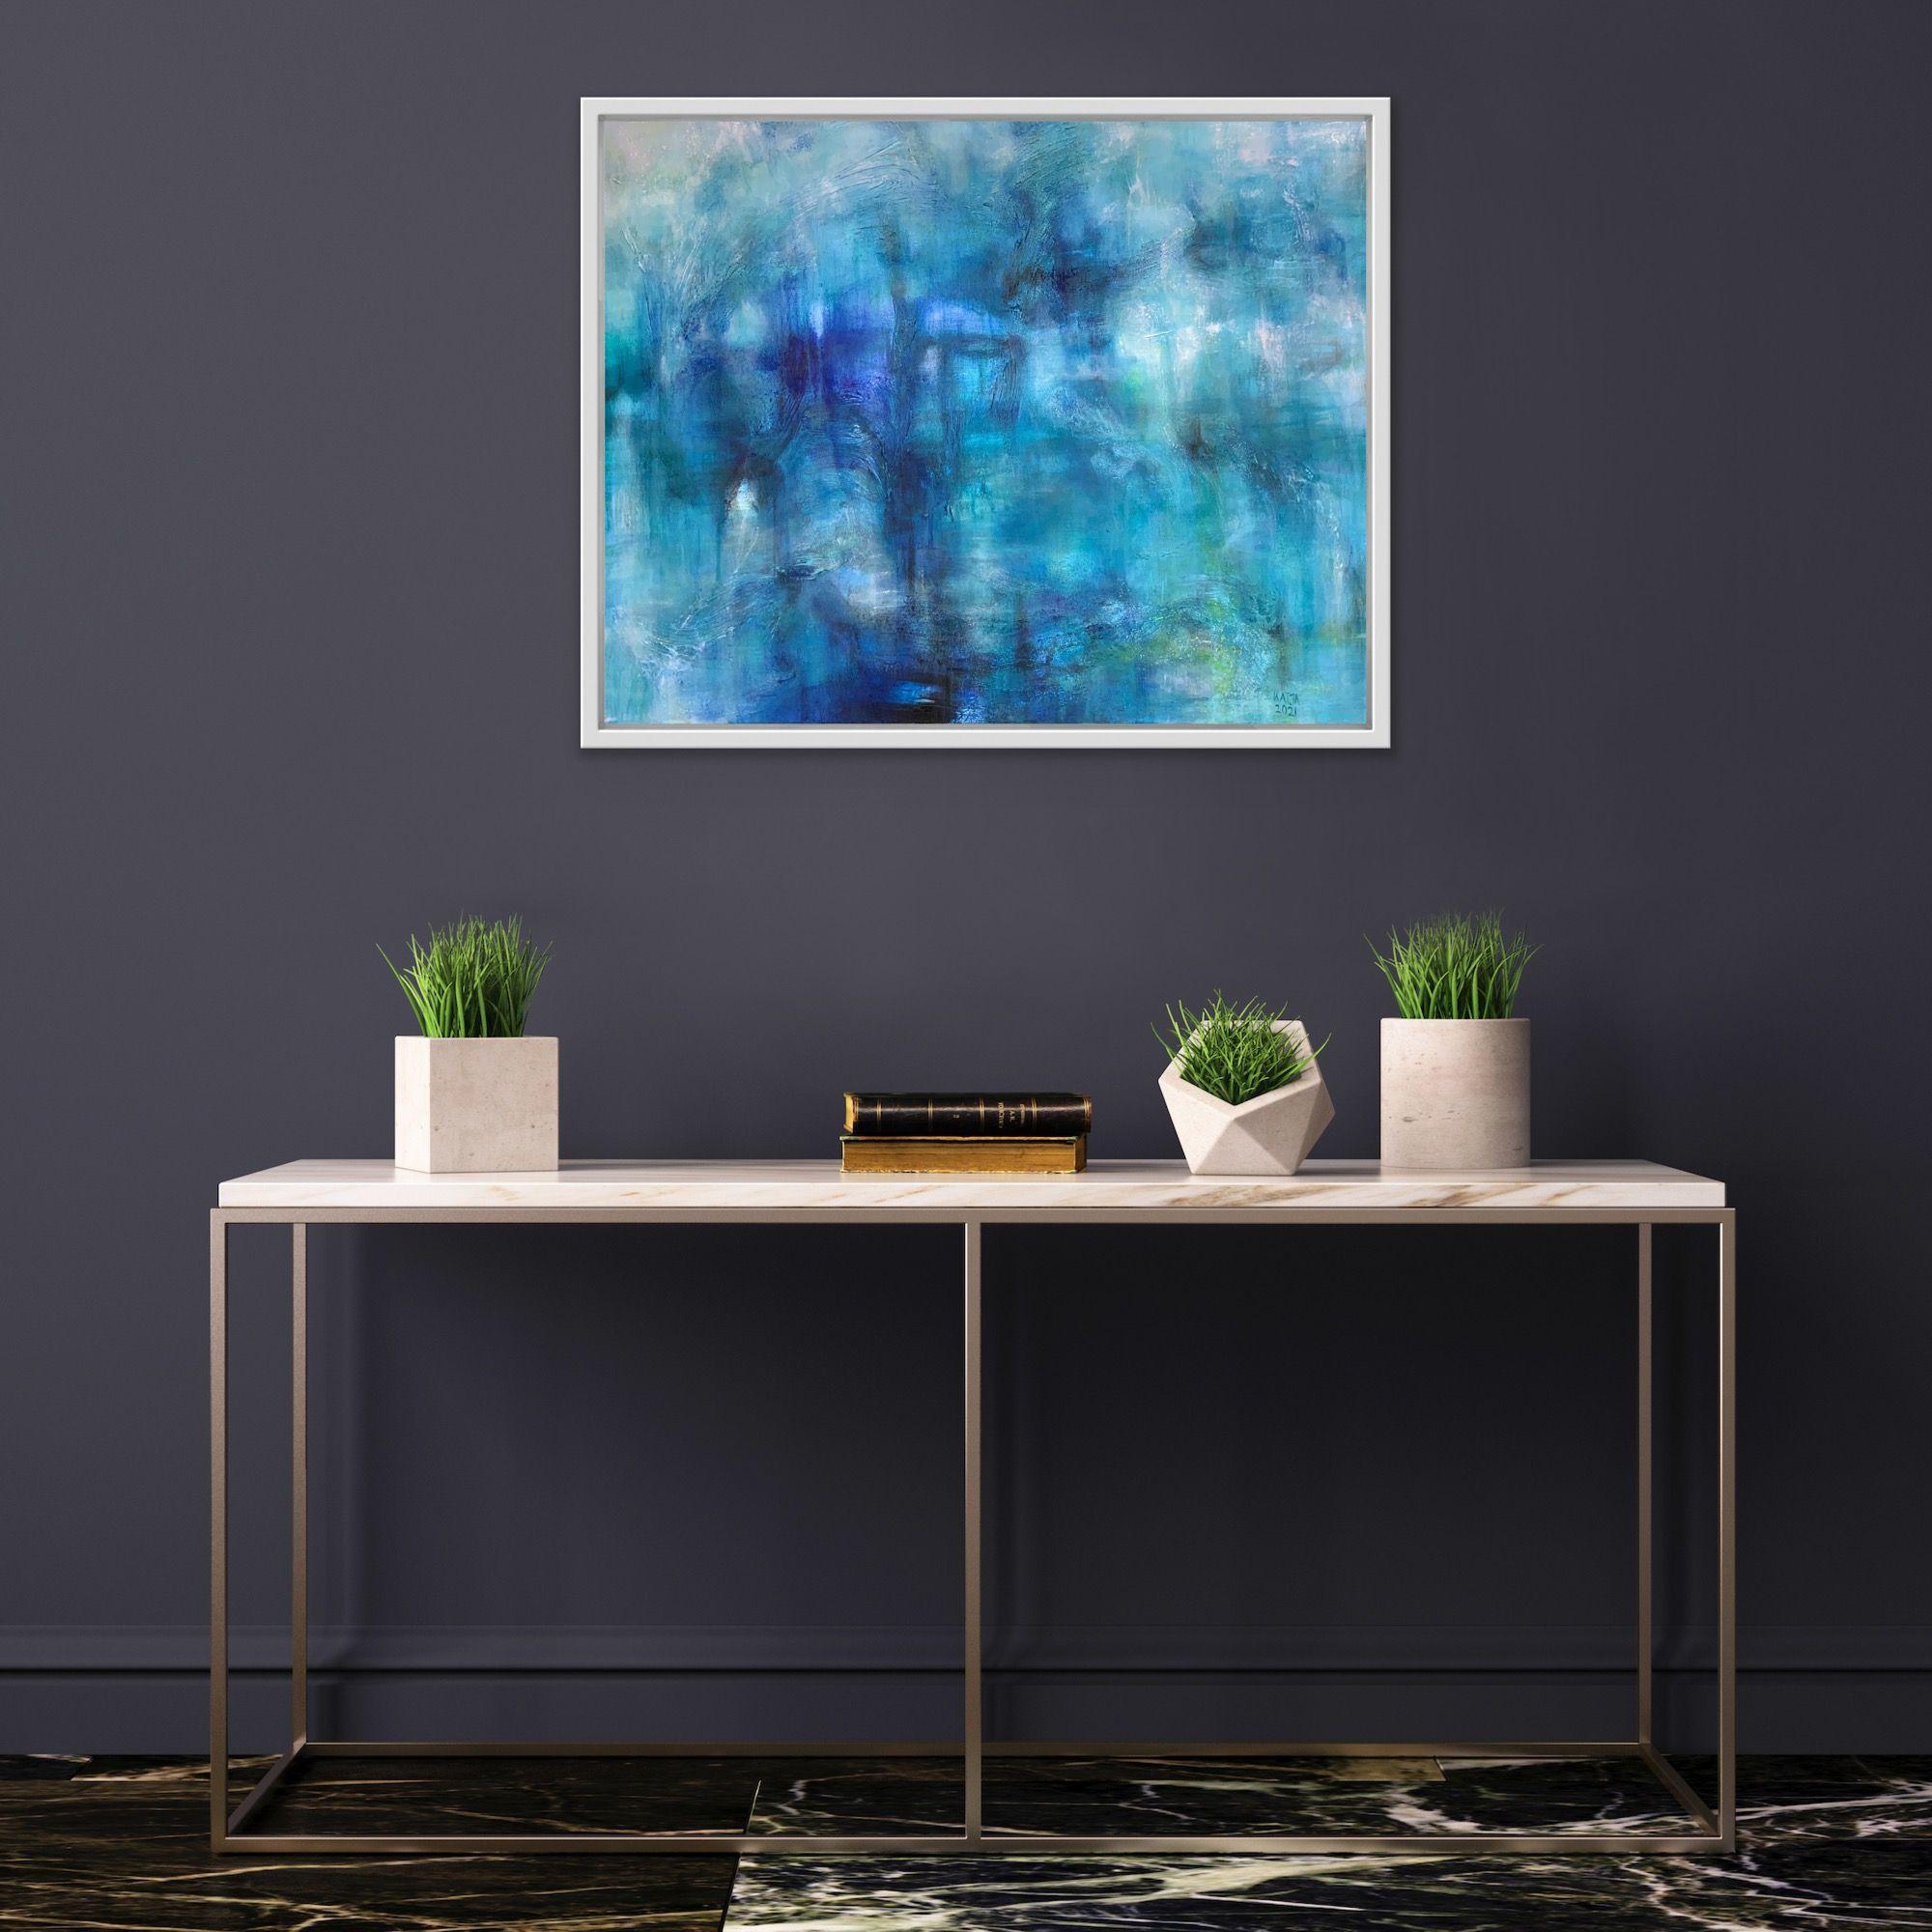 Lush colours merging together weaving a pattern, a textured story. A composition of acrylic paint, plaster, sand and pastels, inspired by a summerâ€™s afternoon walk. Exploring an intense, yet playful way how colours create light and shadows while